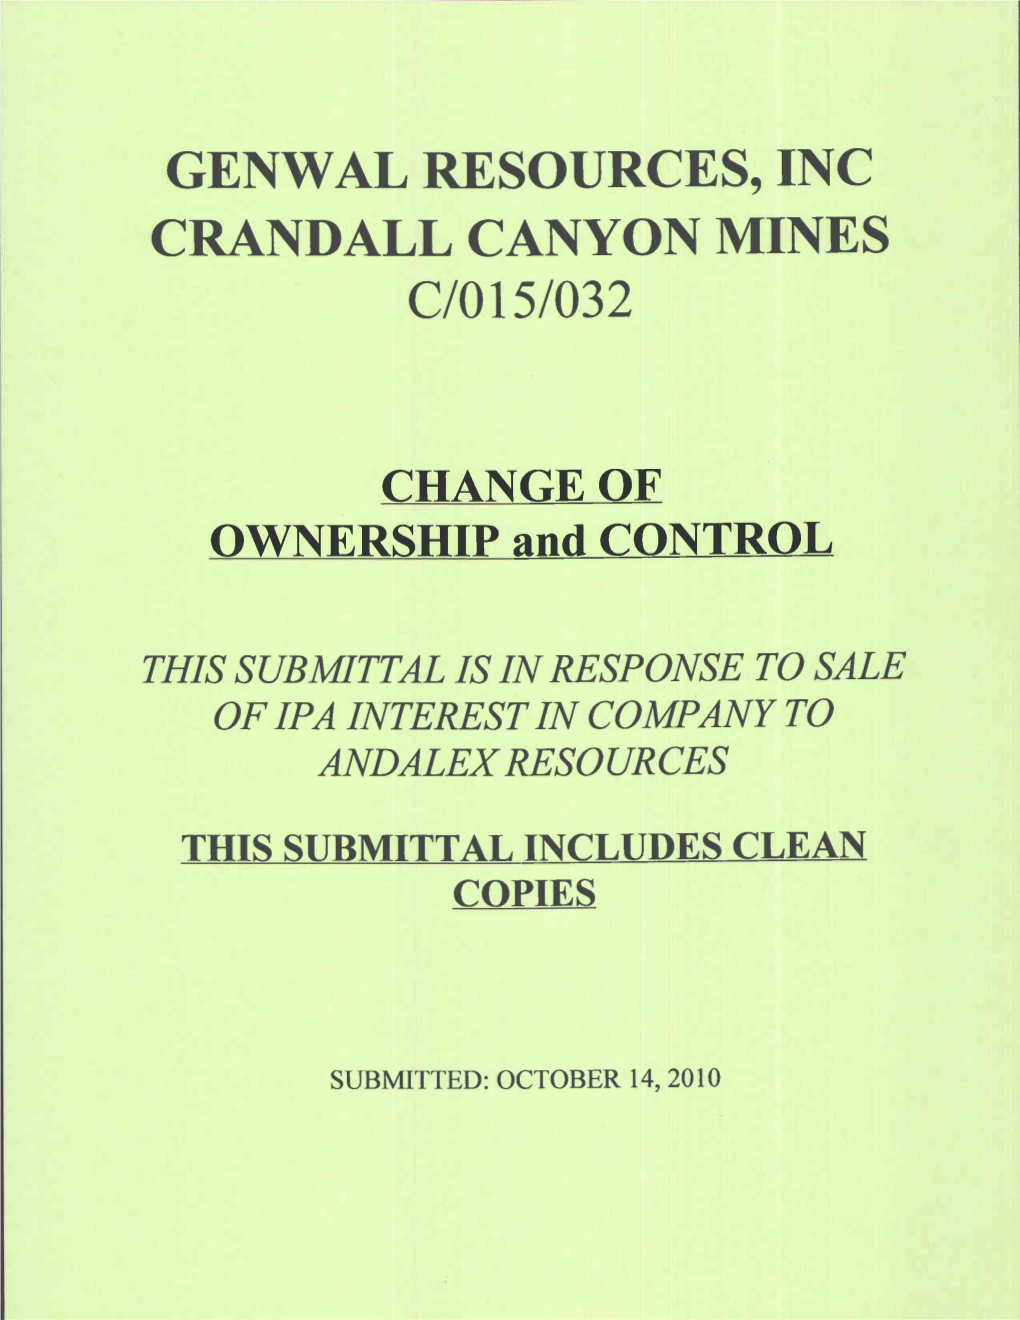 CRANDALL CANYON MINES Cl01 51032